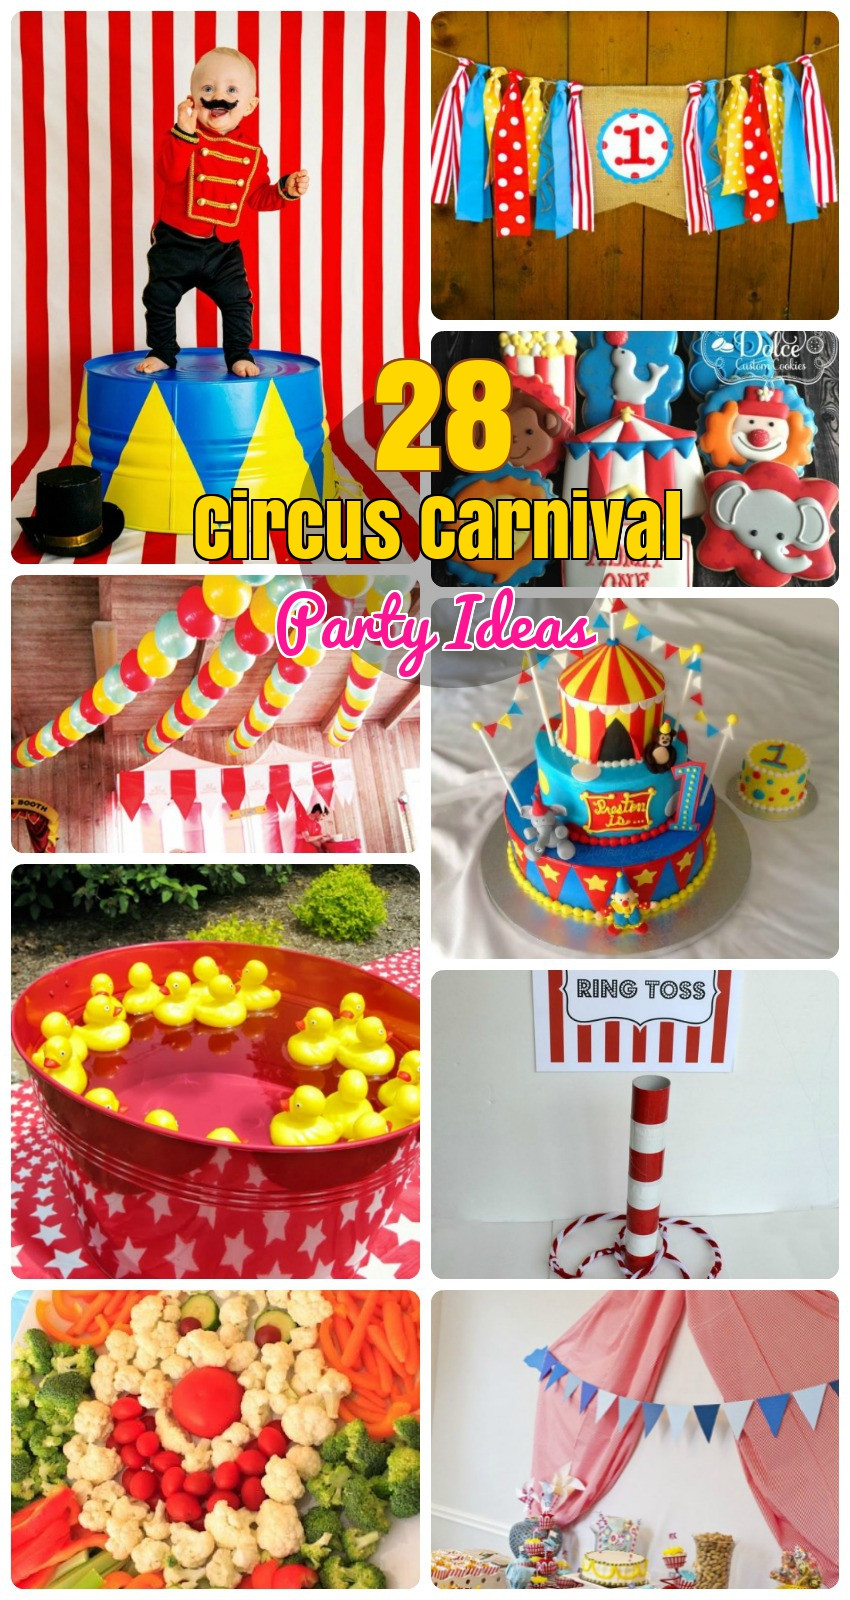 Carnival Themed Birthday Party Ideas
 28 Circus Carnival Themed Birthday Party Ideas for Kids